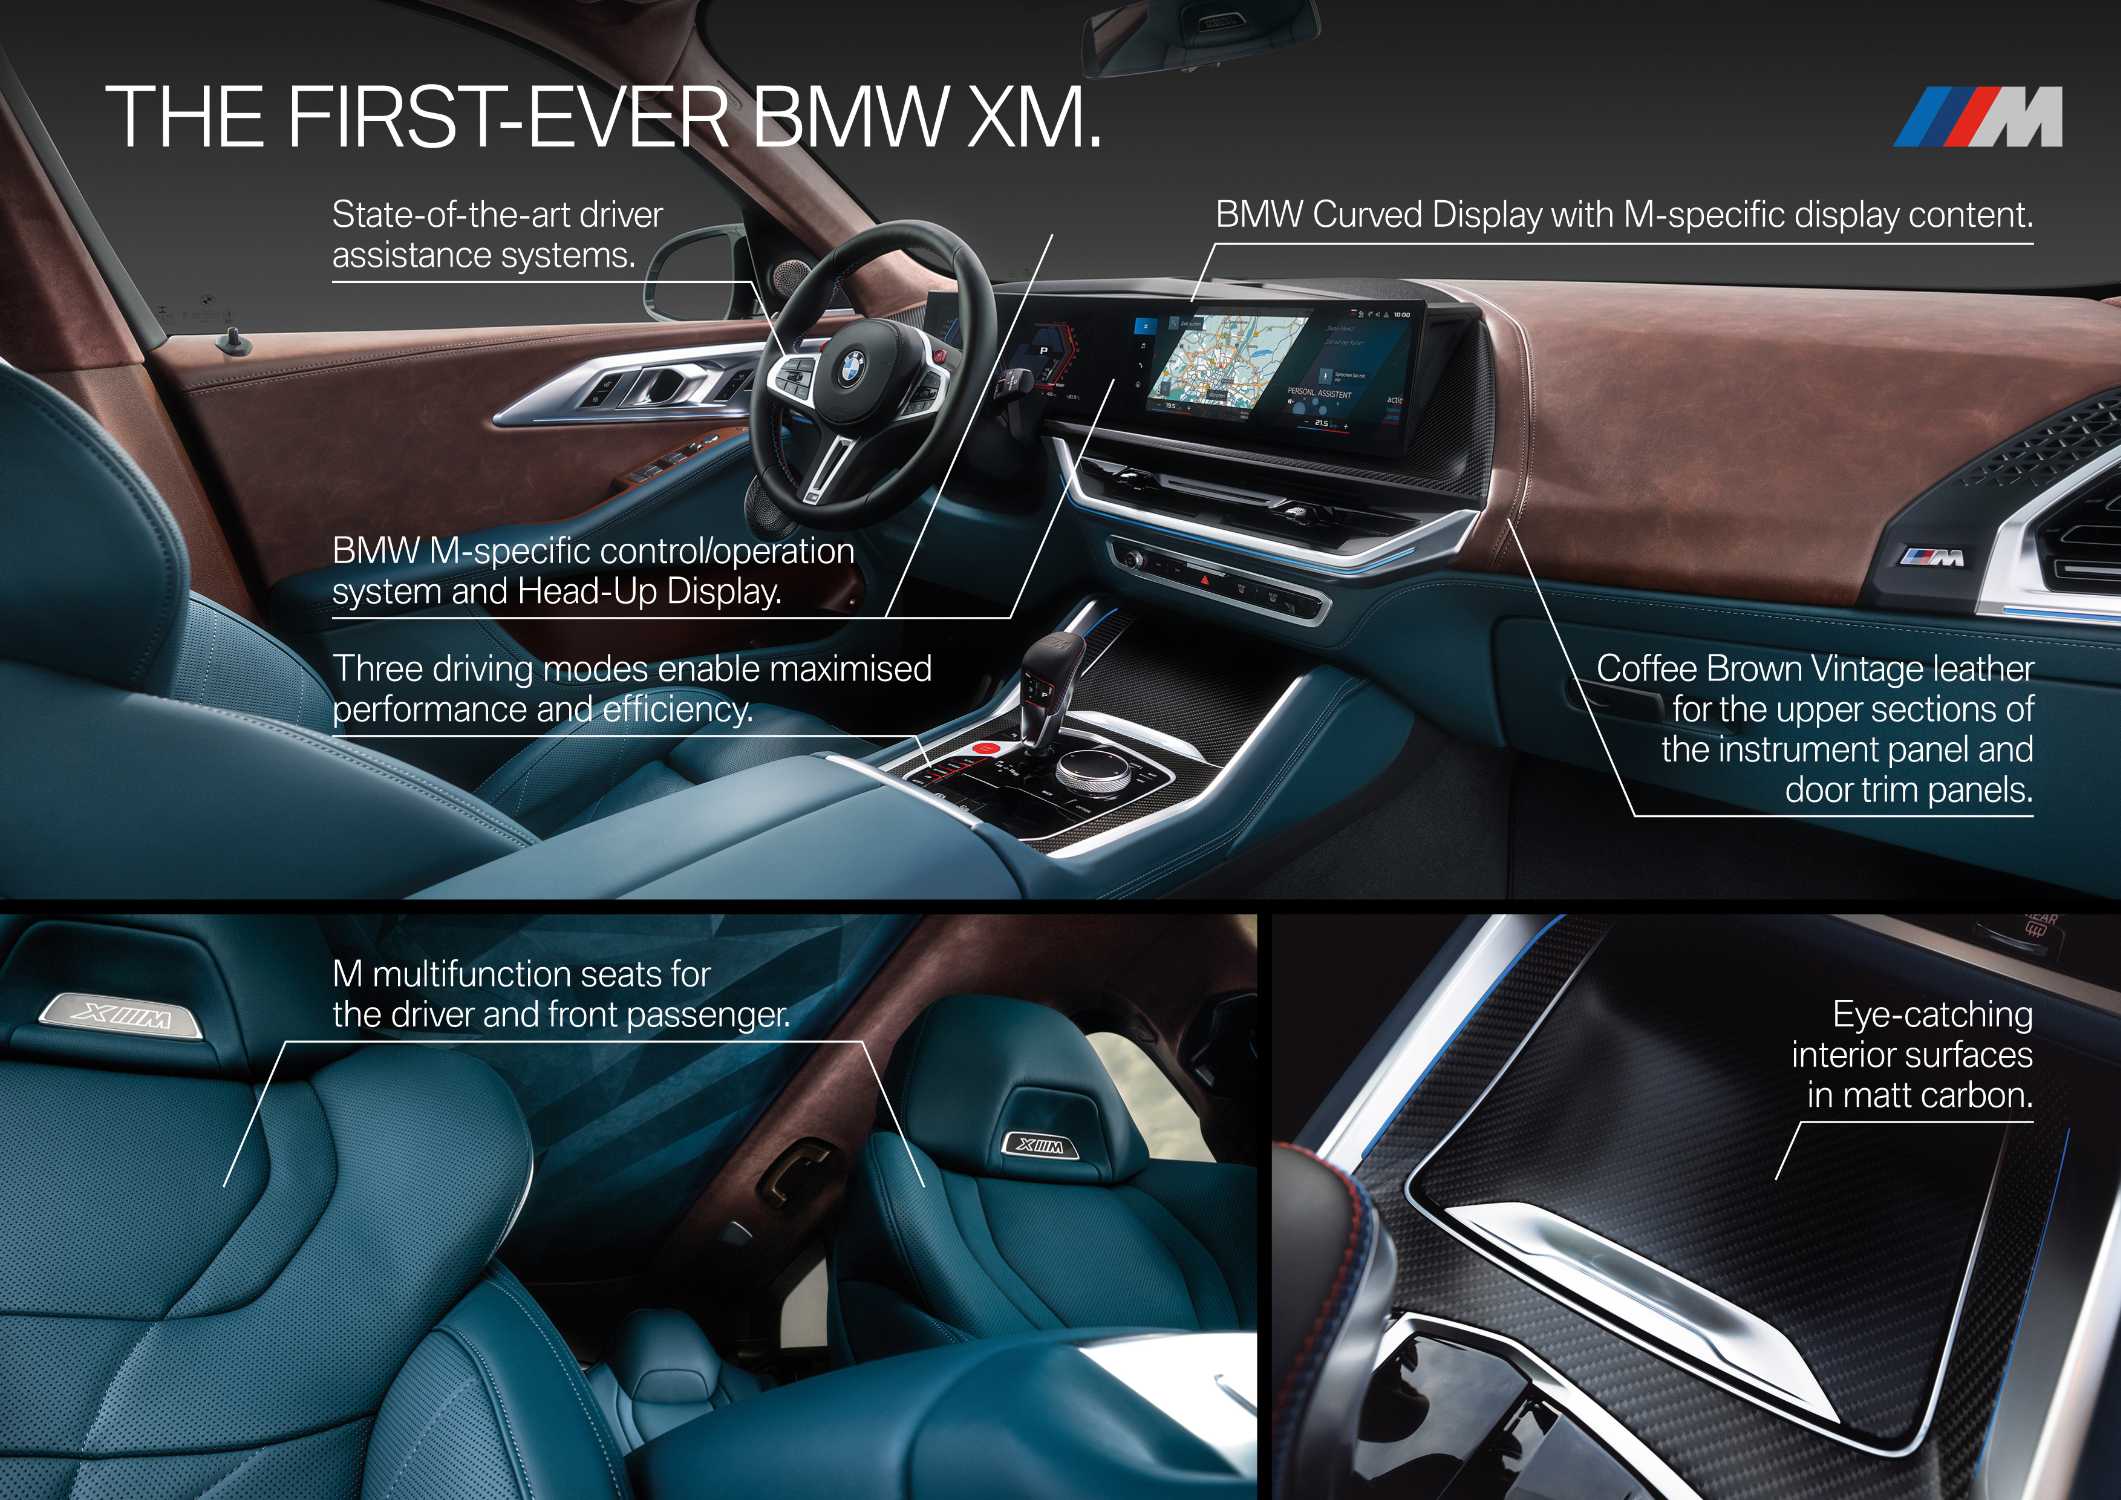 The first-ever BMW XM